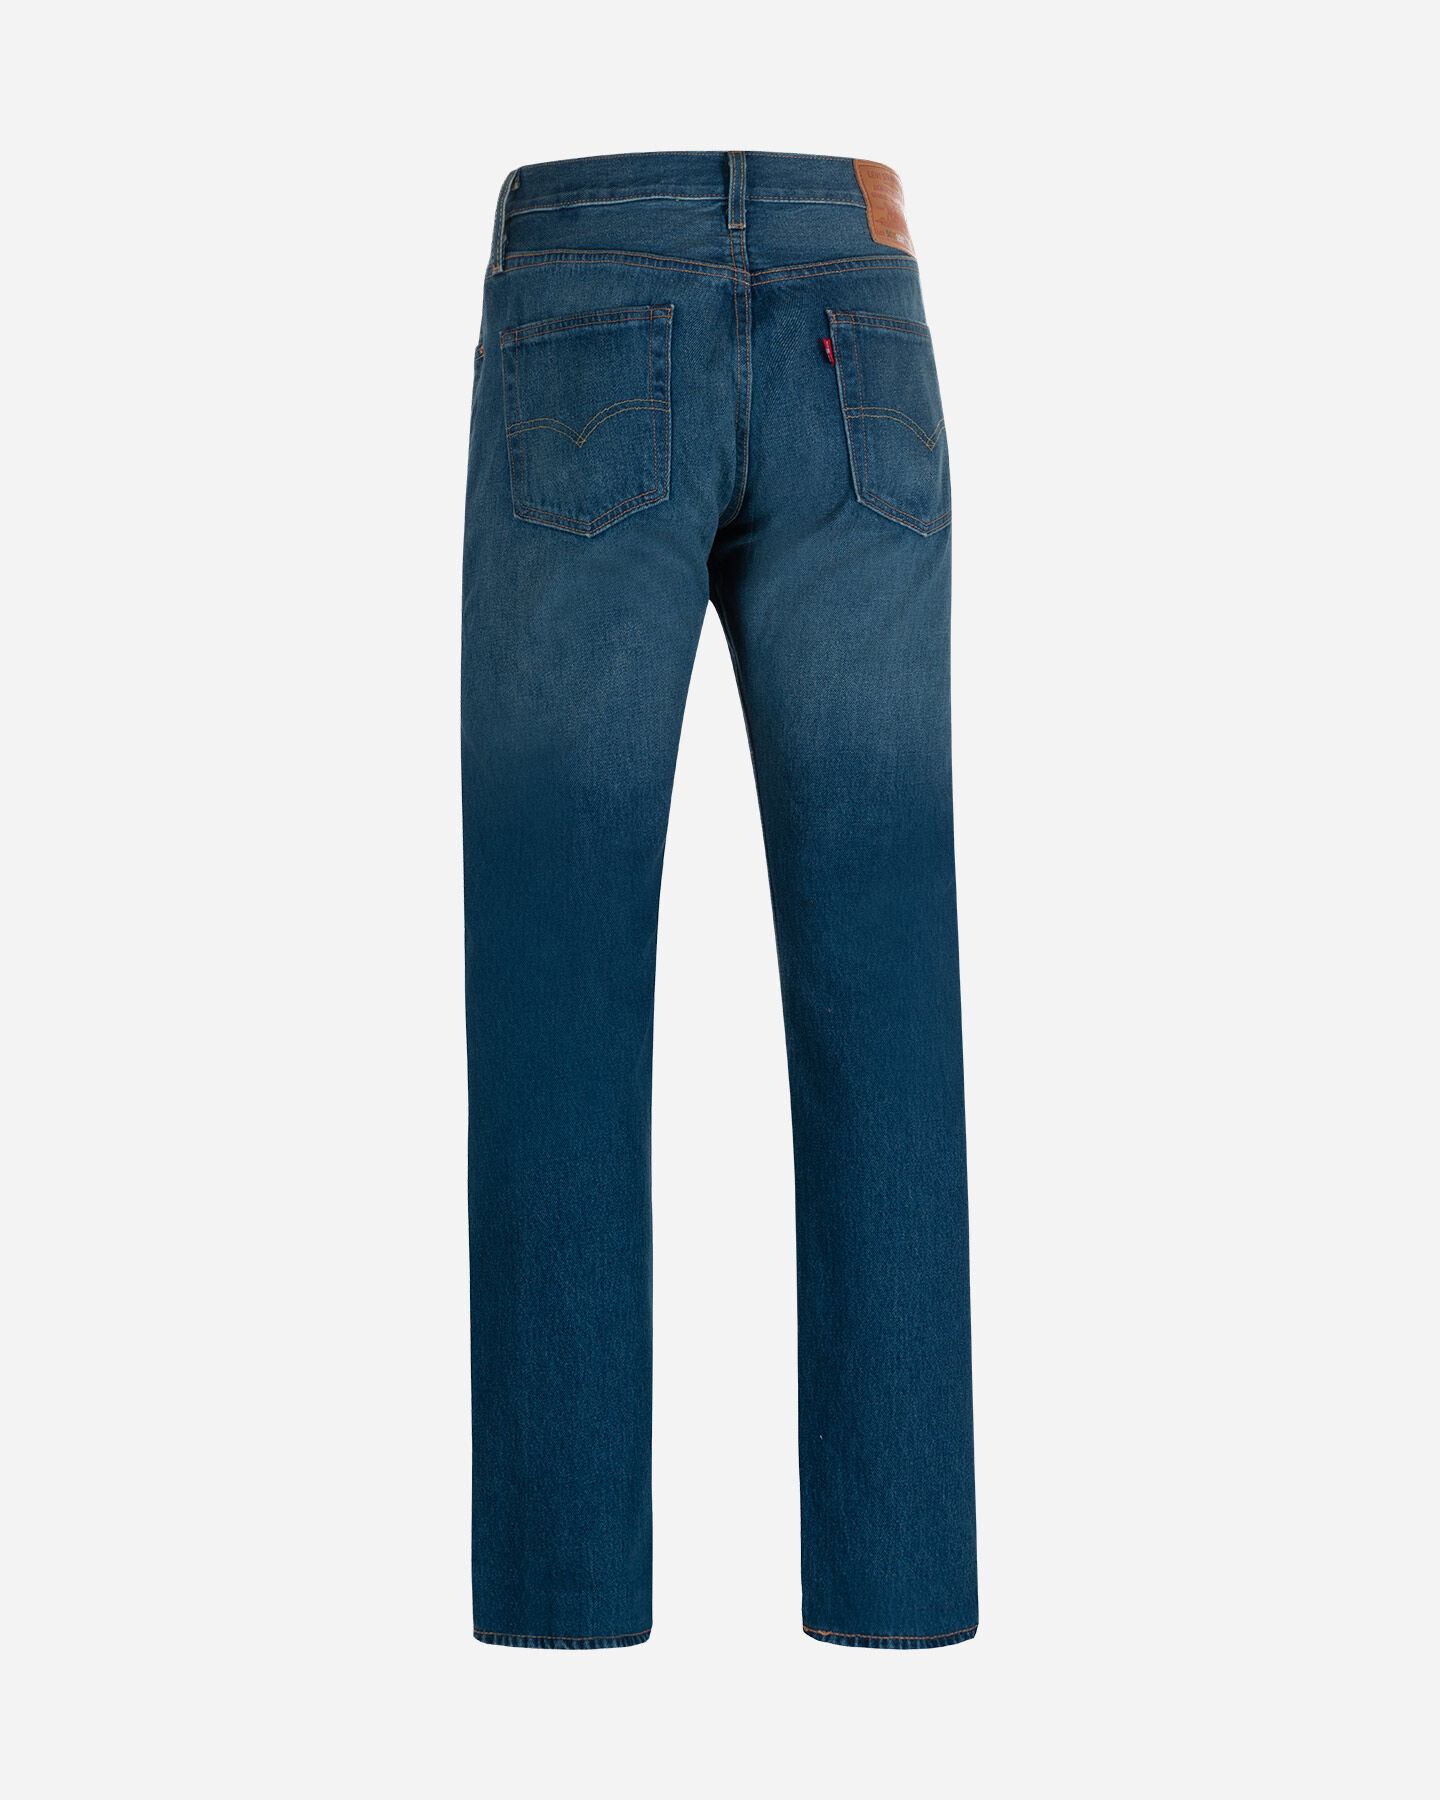  Jeans LEVI'S 501 REGULAR M S4122315|3382|33 scatto 1